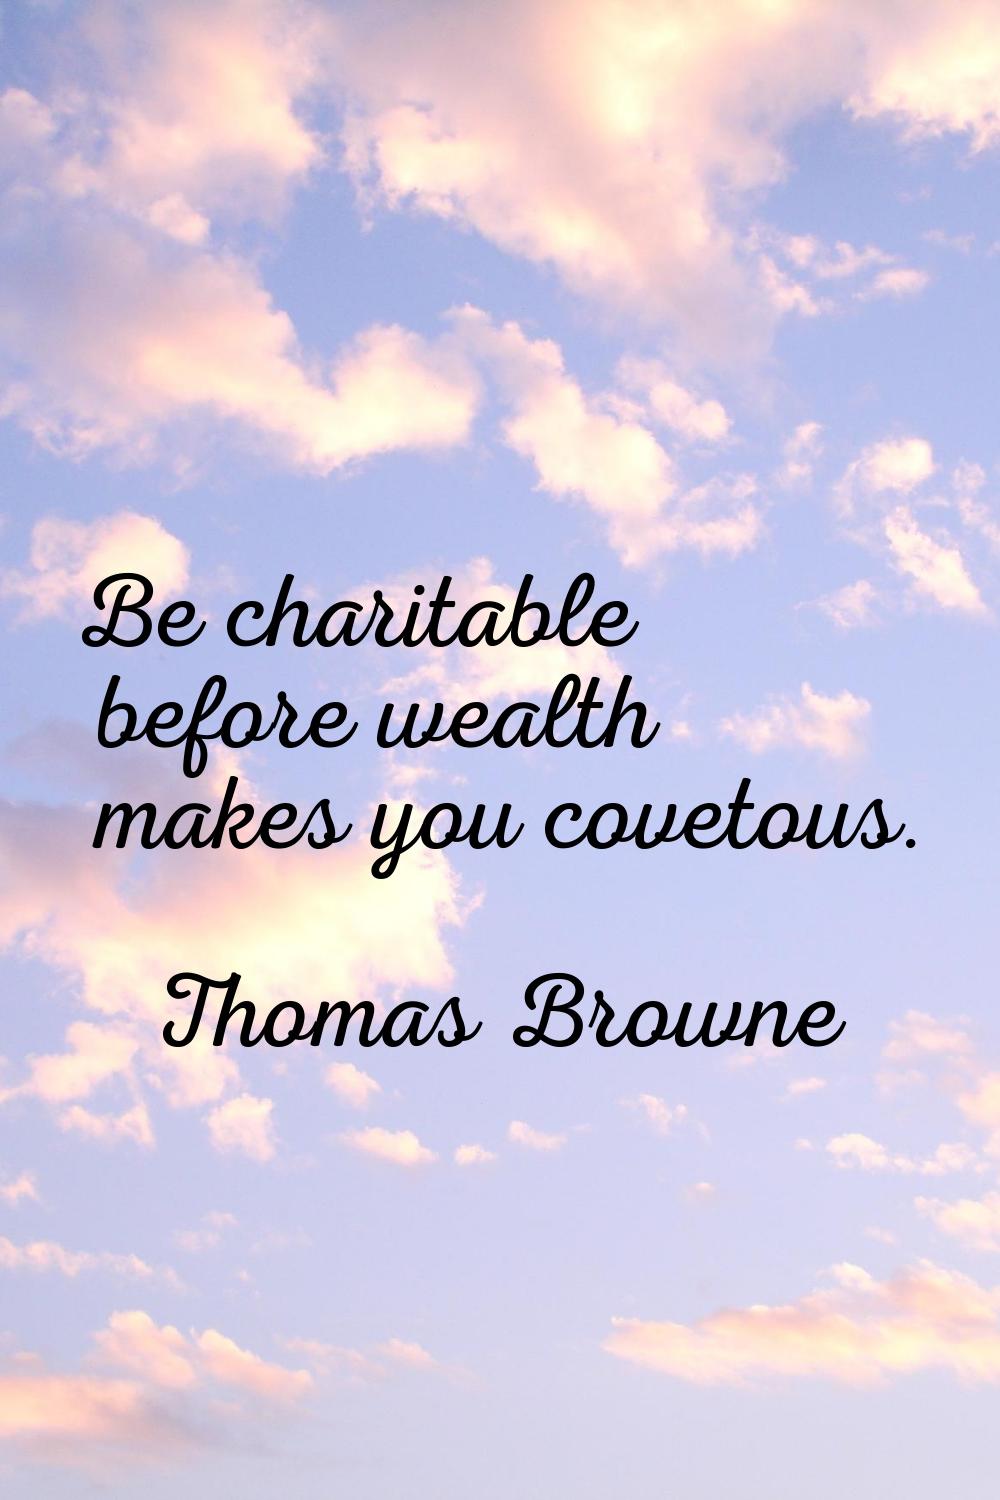 Be charitable before wealth makes you covetous.